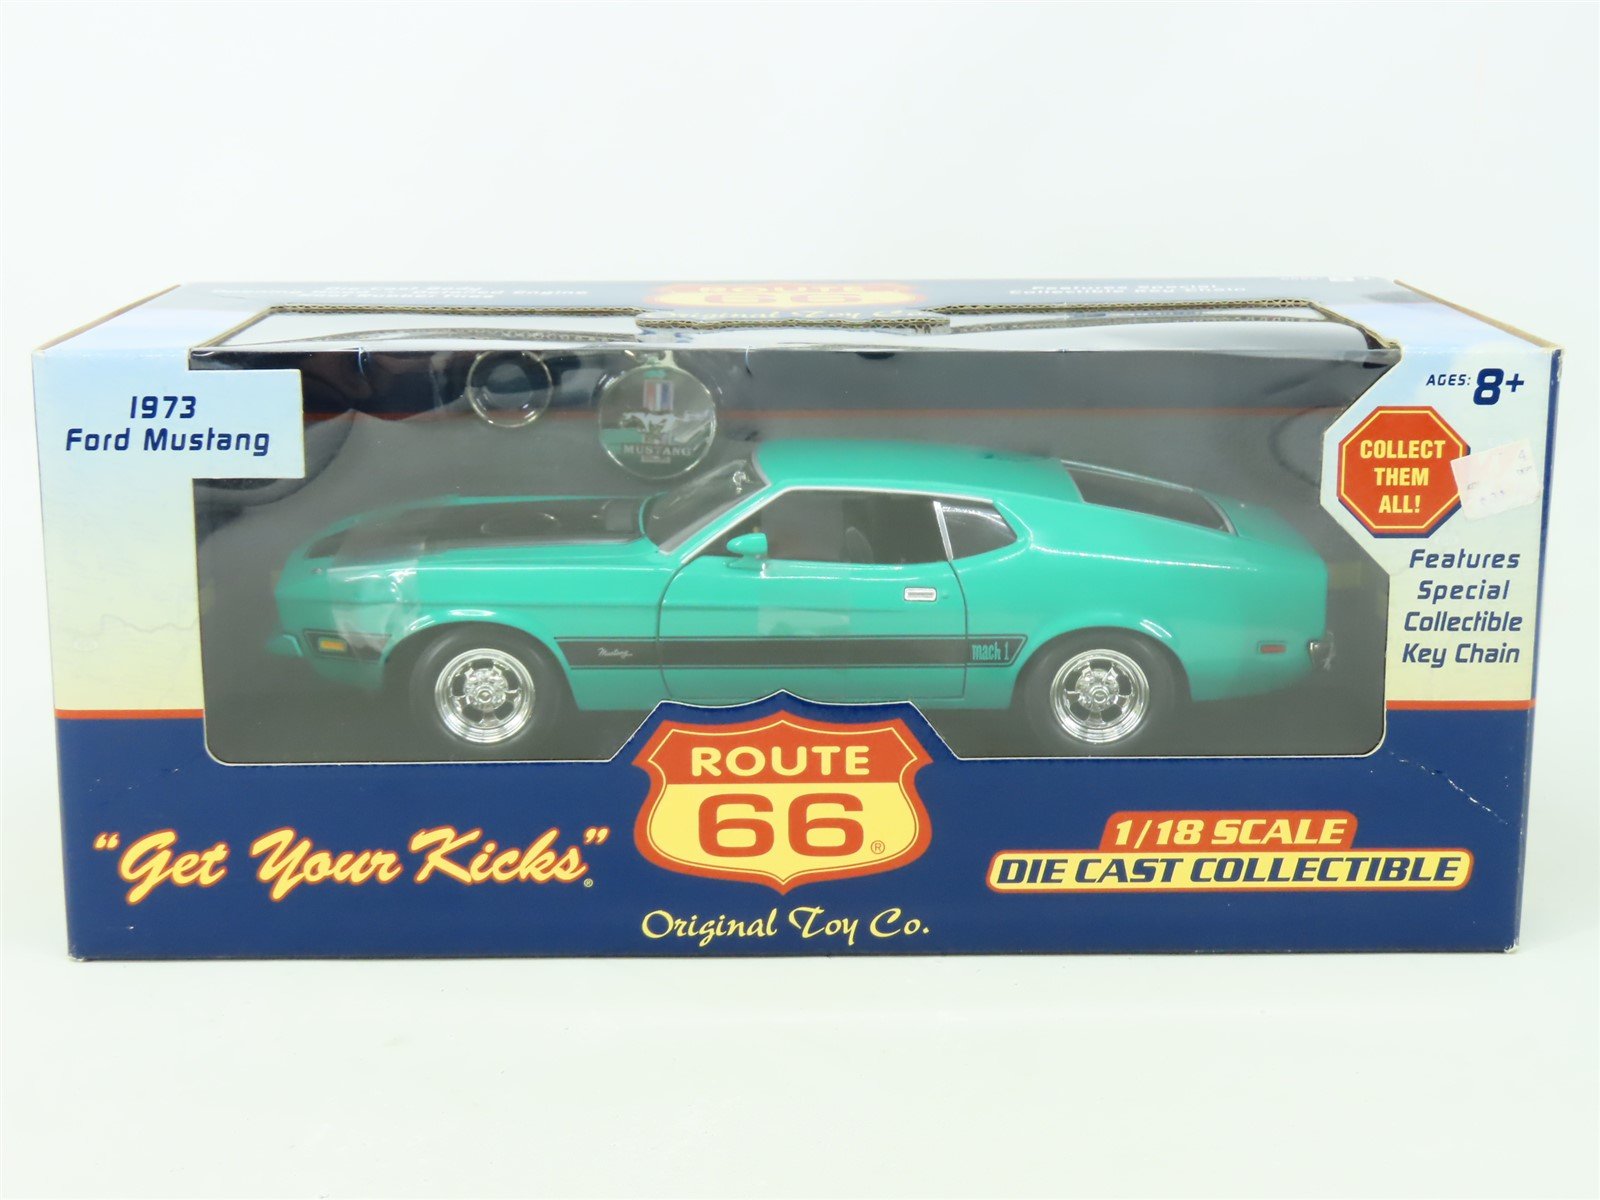 1:18 Scale Original Toy Co. Route 66 Die-Cast 1973 Ford Mustang - Green/Black